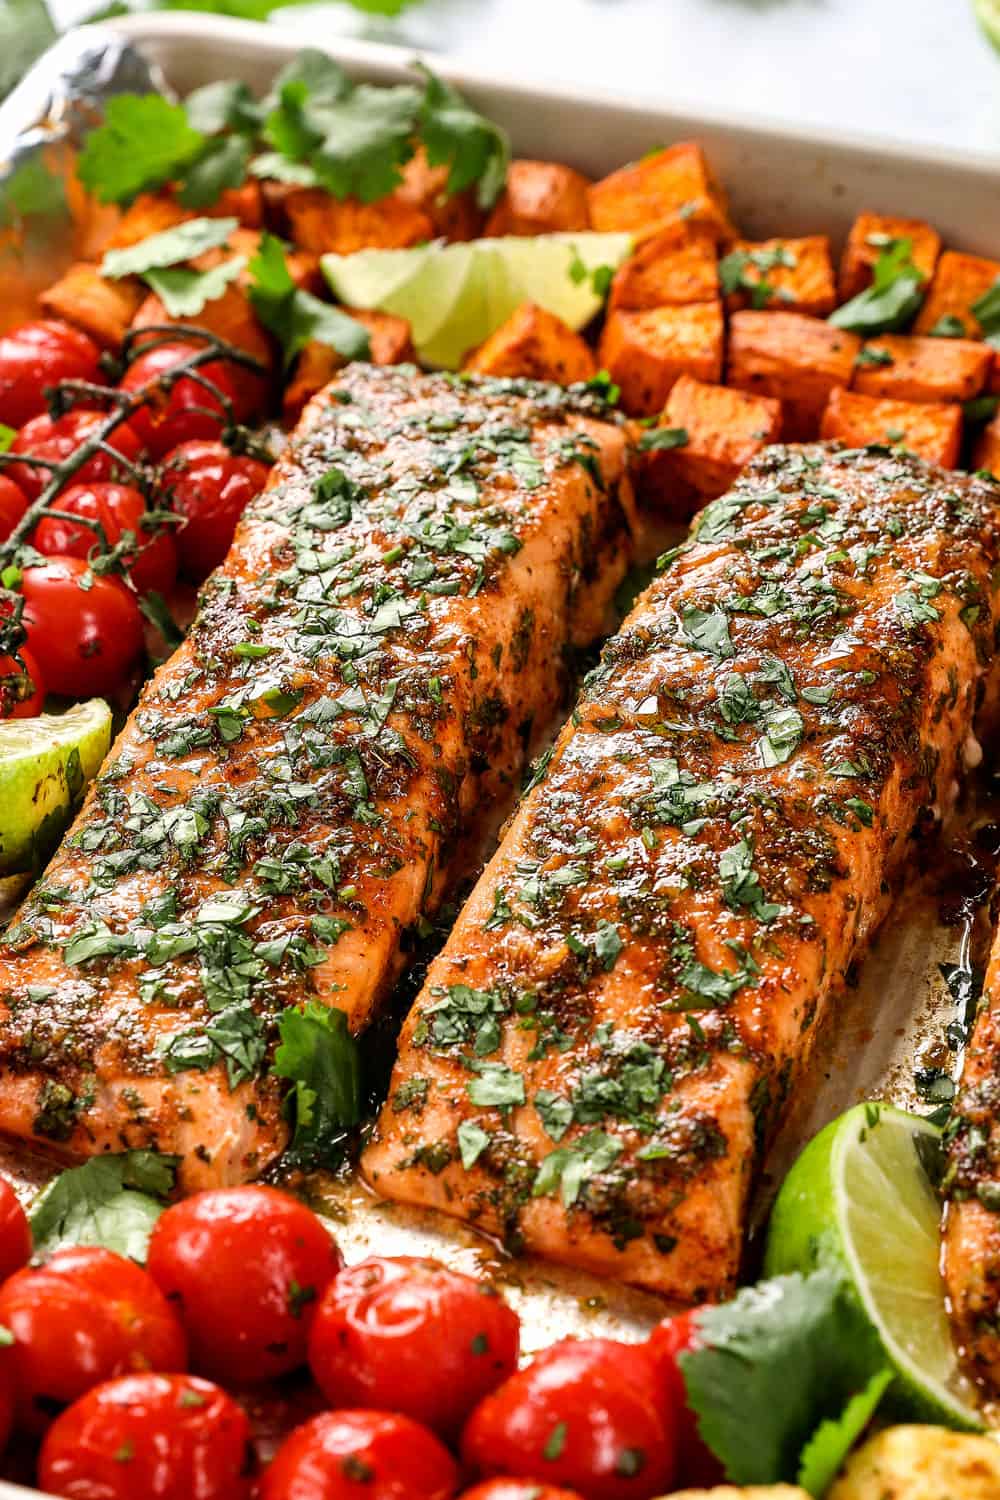 up close of baked salmon fillets on a baking sheet